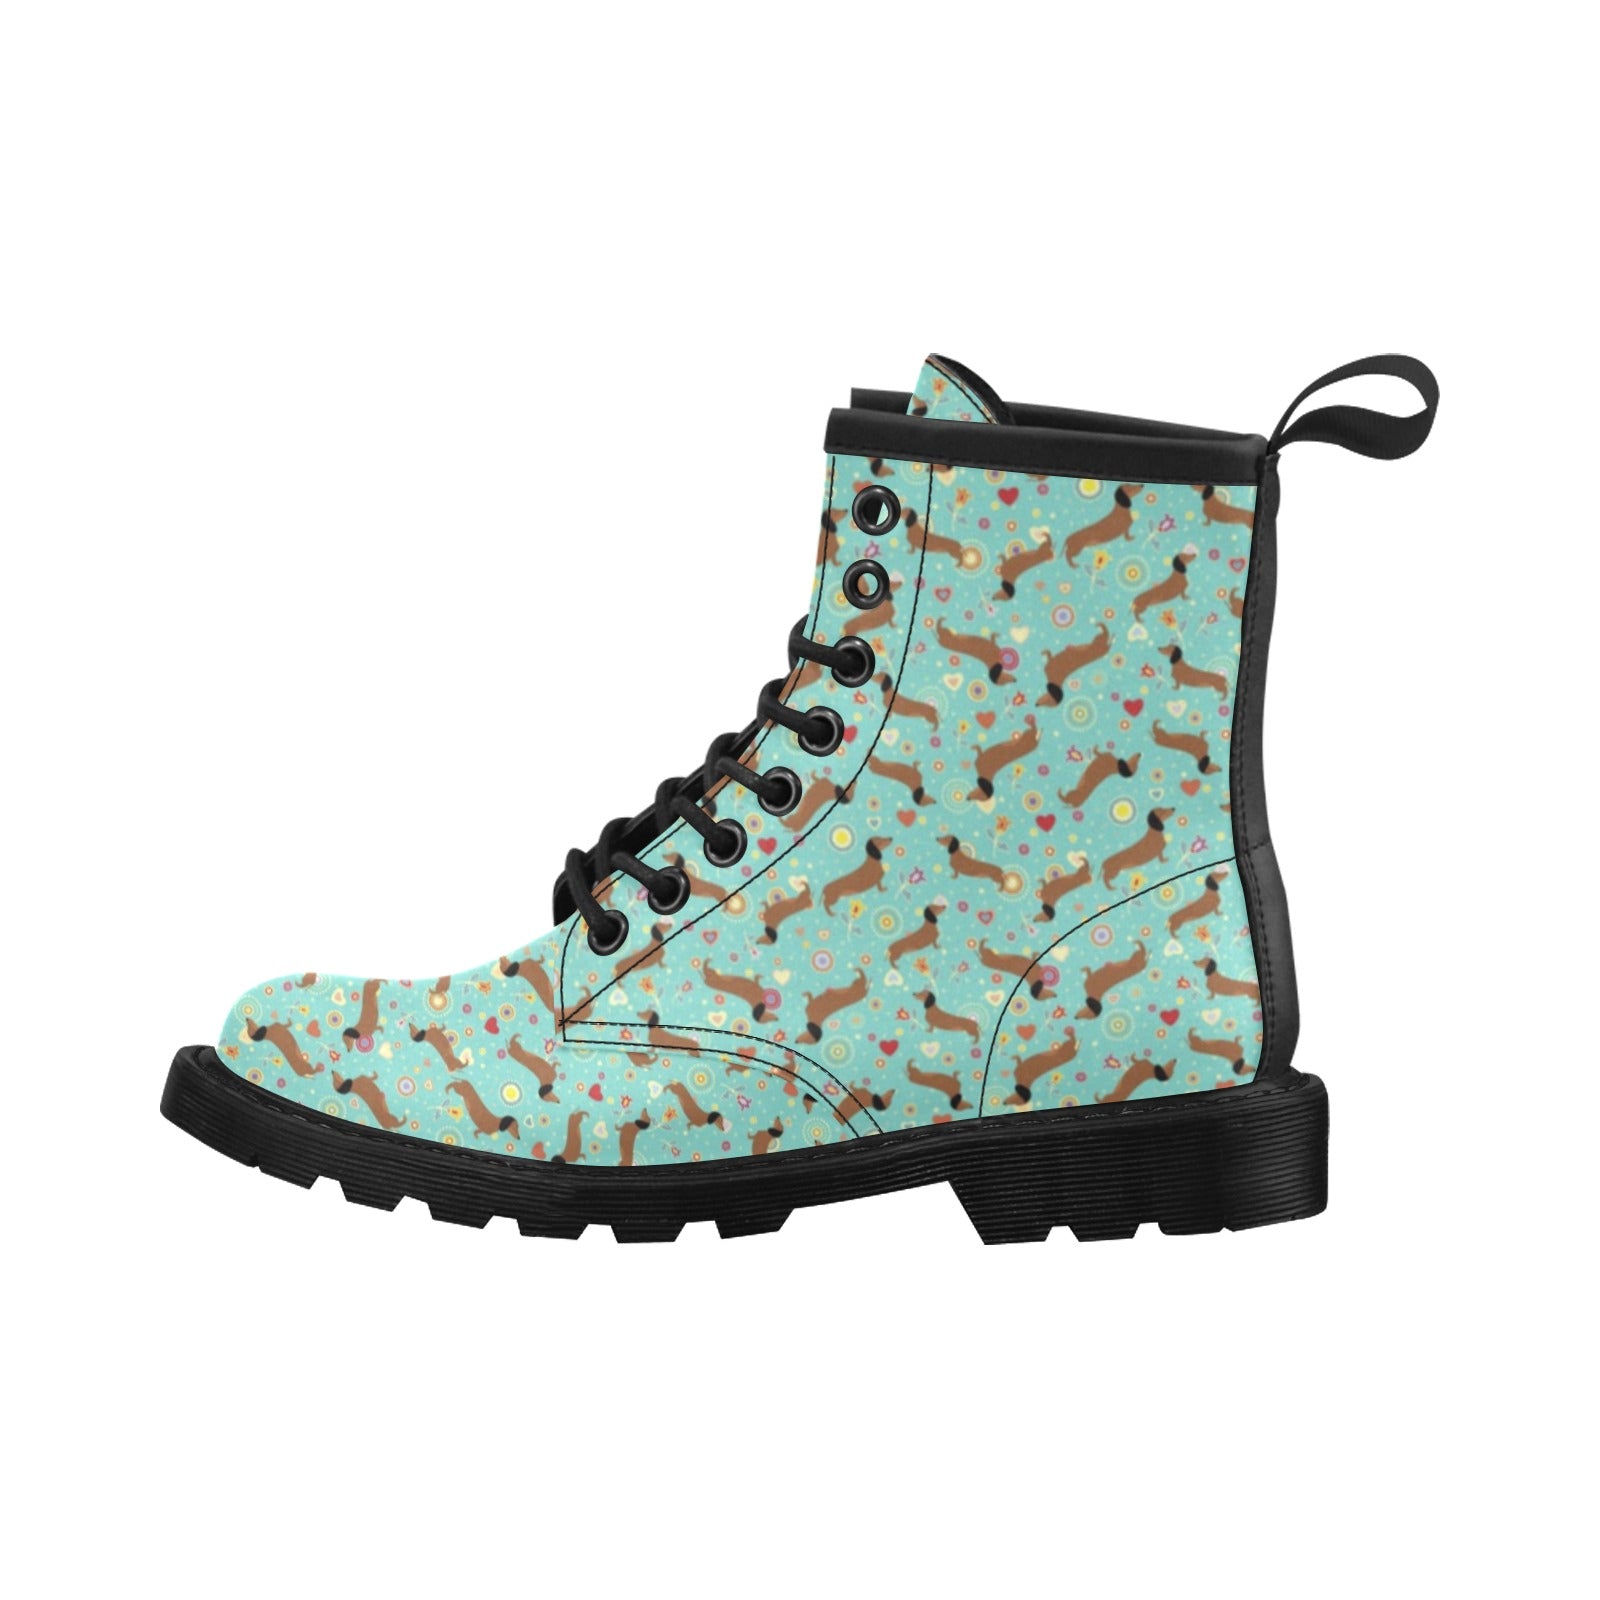 Dachshund with Floral Print Pattern Women's Boots